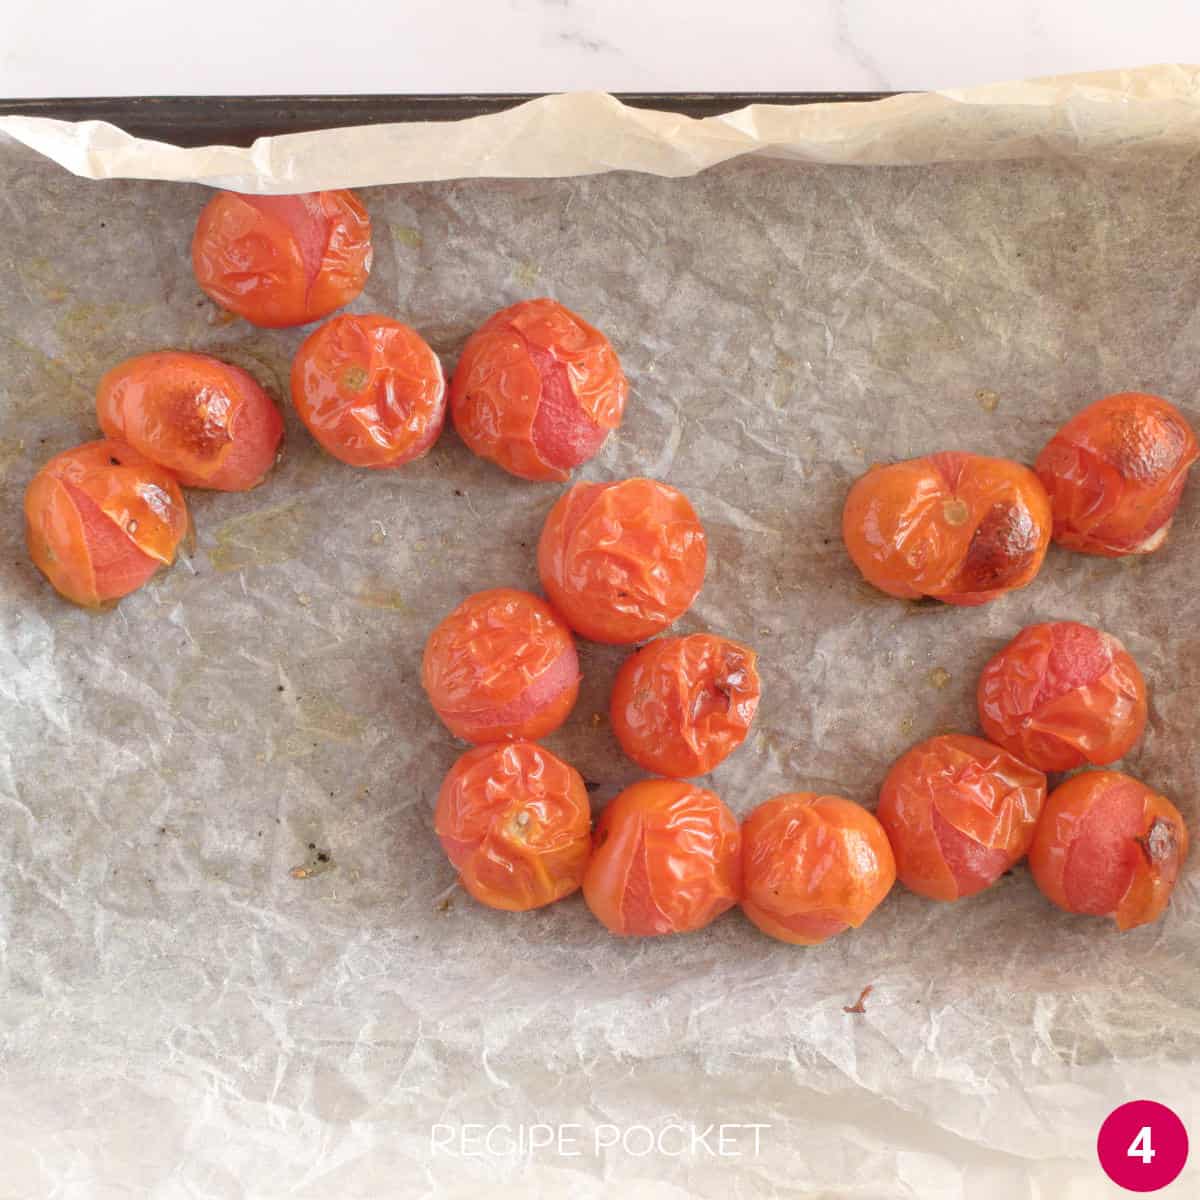 A small tray of roasted cherry tomatoes.